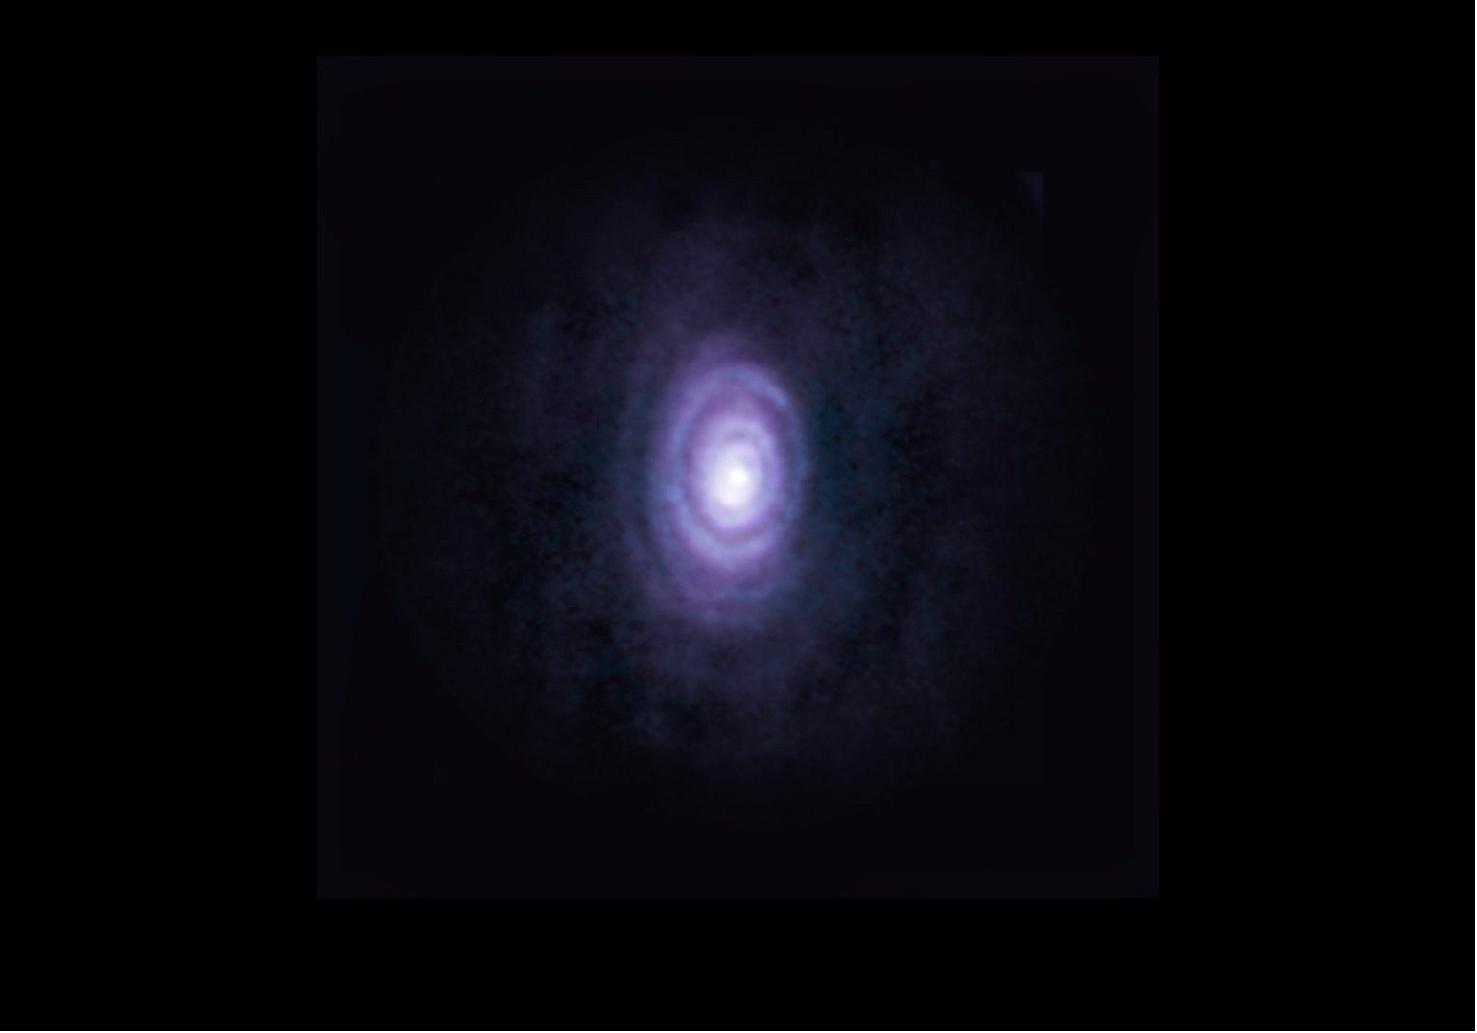 Figure 27: The carbon-rich star V Hydrae is in its final act, and so far, its death has proved magnificent and violent. Scientists studying the star have discovered six outflowing rings (shown here in composite), and other structures created by the explosive mass ejection of matter into space [image credit: ALMA (ESO/NAOJ/NRAO)/S. Dagnello (NRAO/AUI/NSF)]